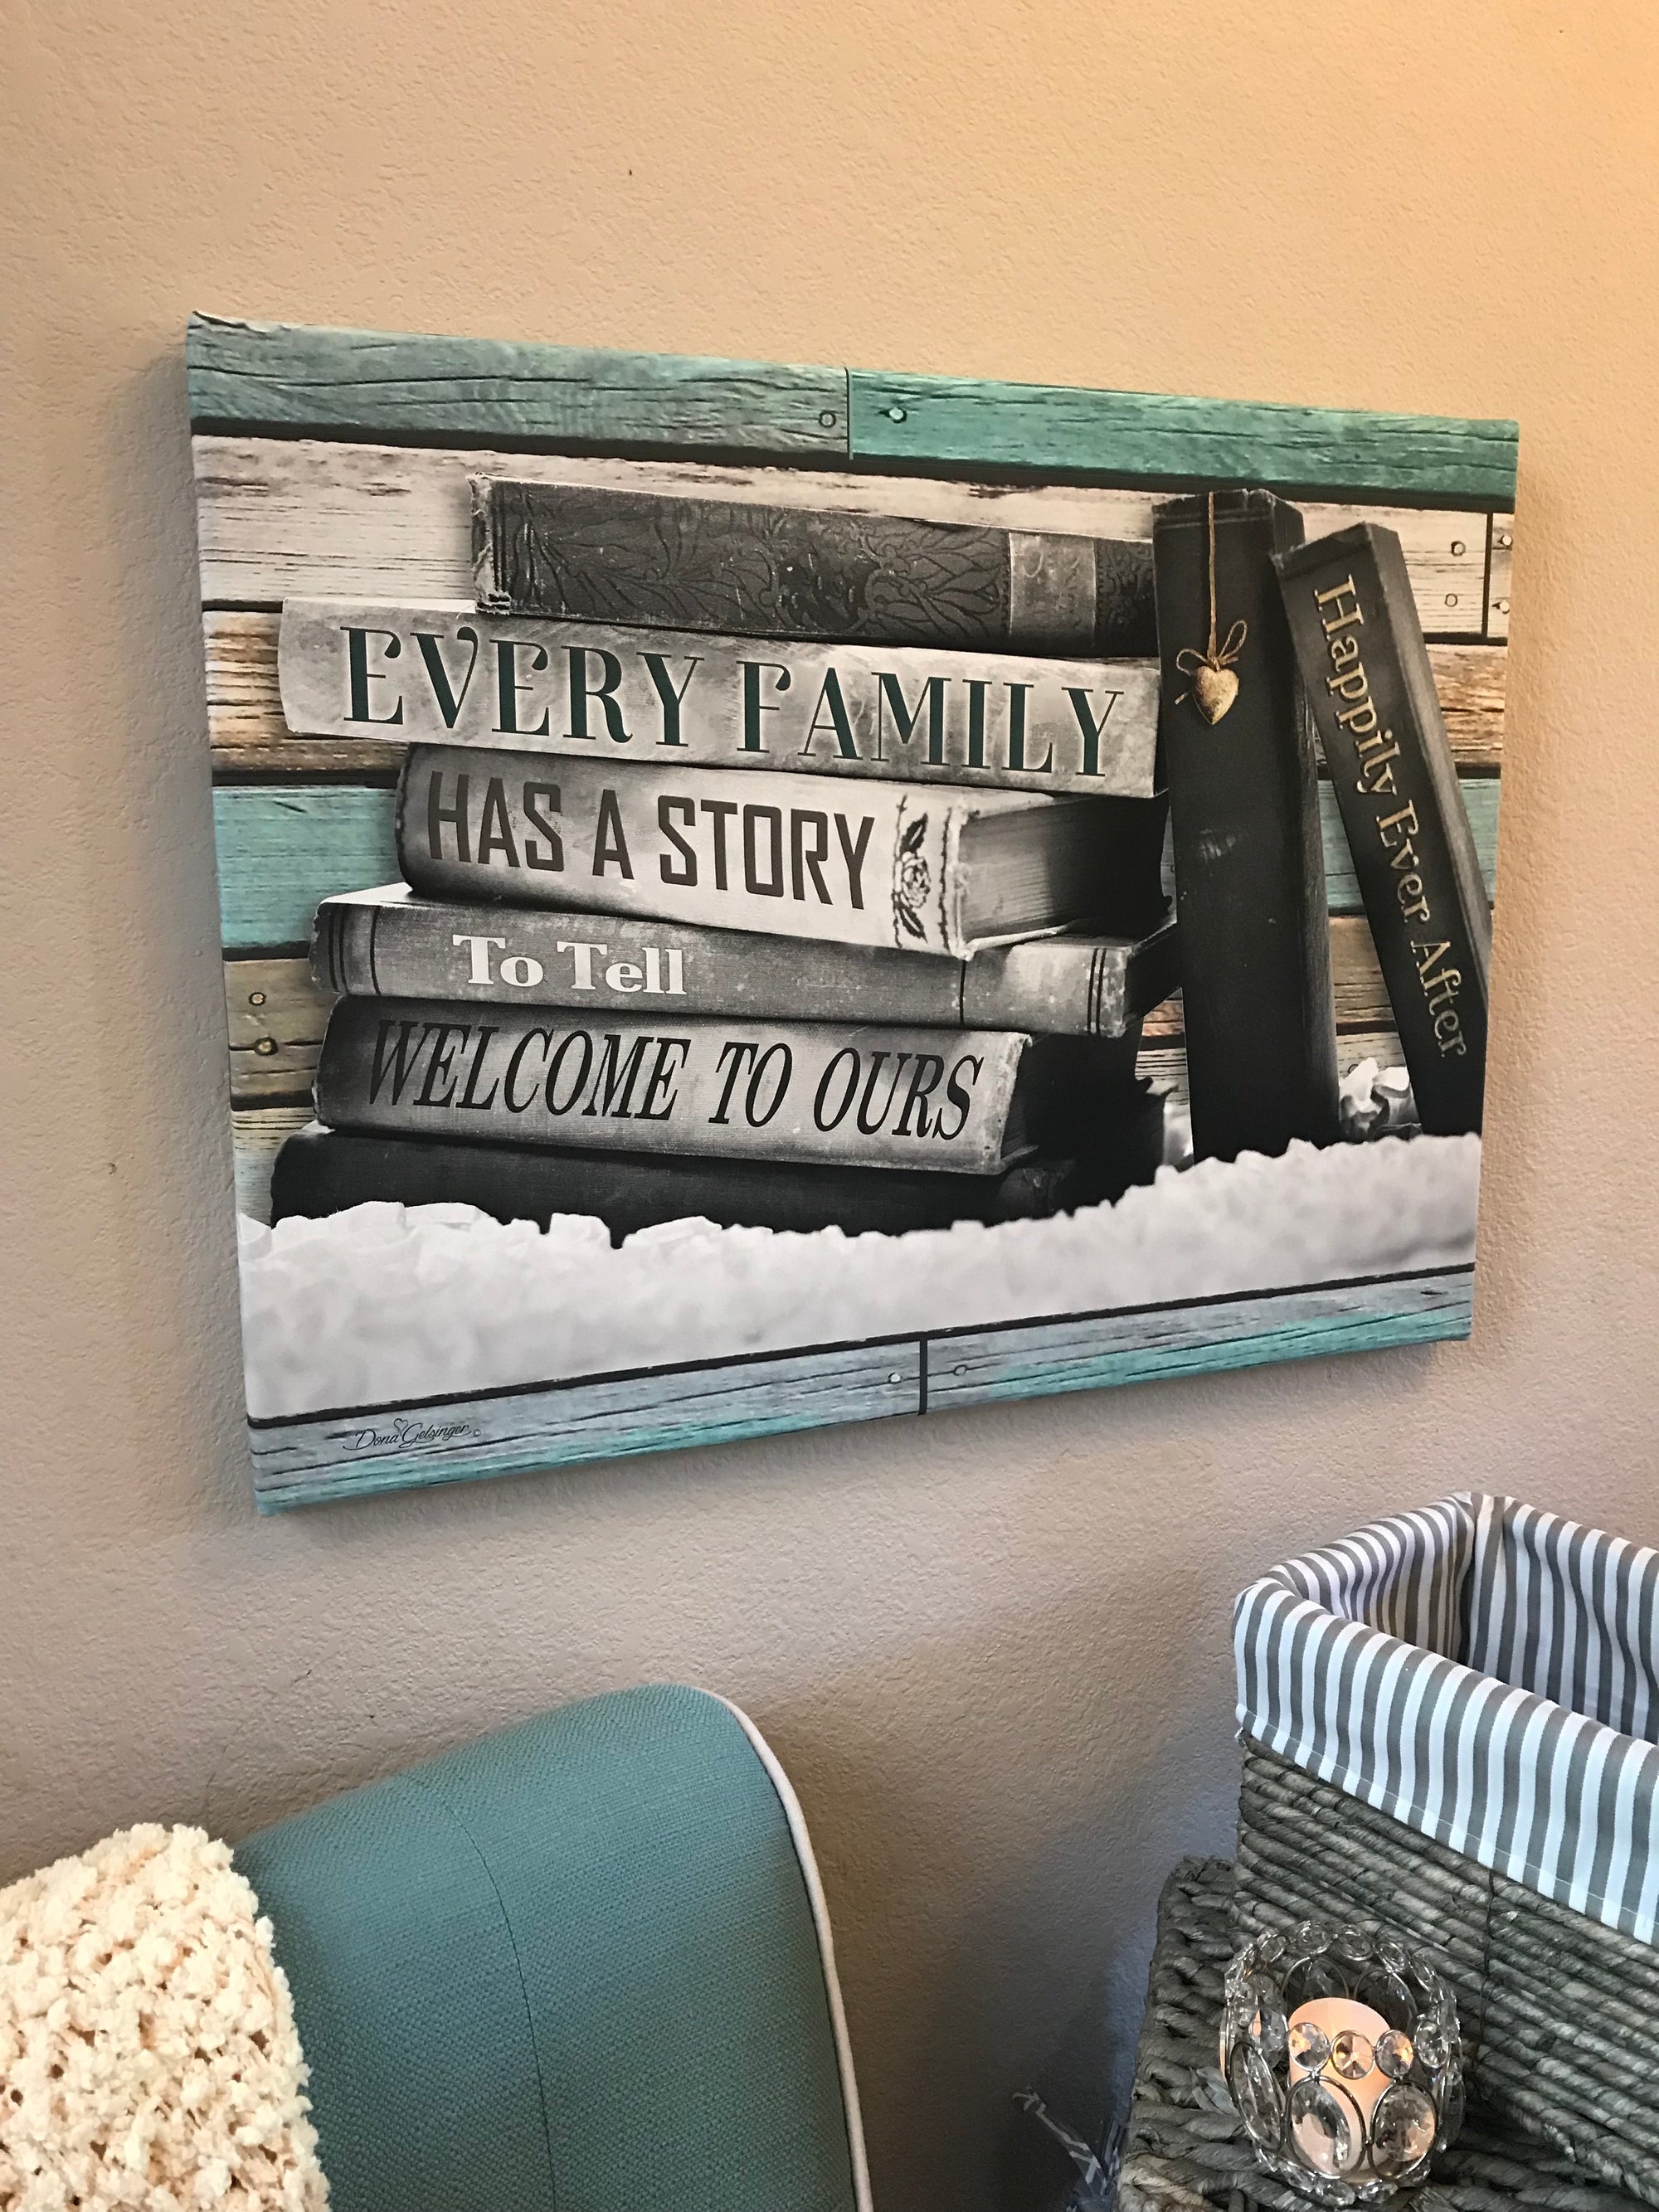 In front of the wall sits a charming stack of books, each one showcasing a word or two that tells your unique tale. "Every family has a story to tell, welcome to ours" is beautifully written on the stack, inviting your guests to learn more about your wonderful journey together.